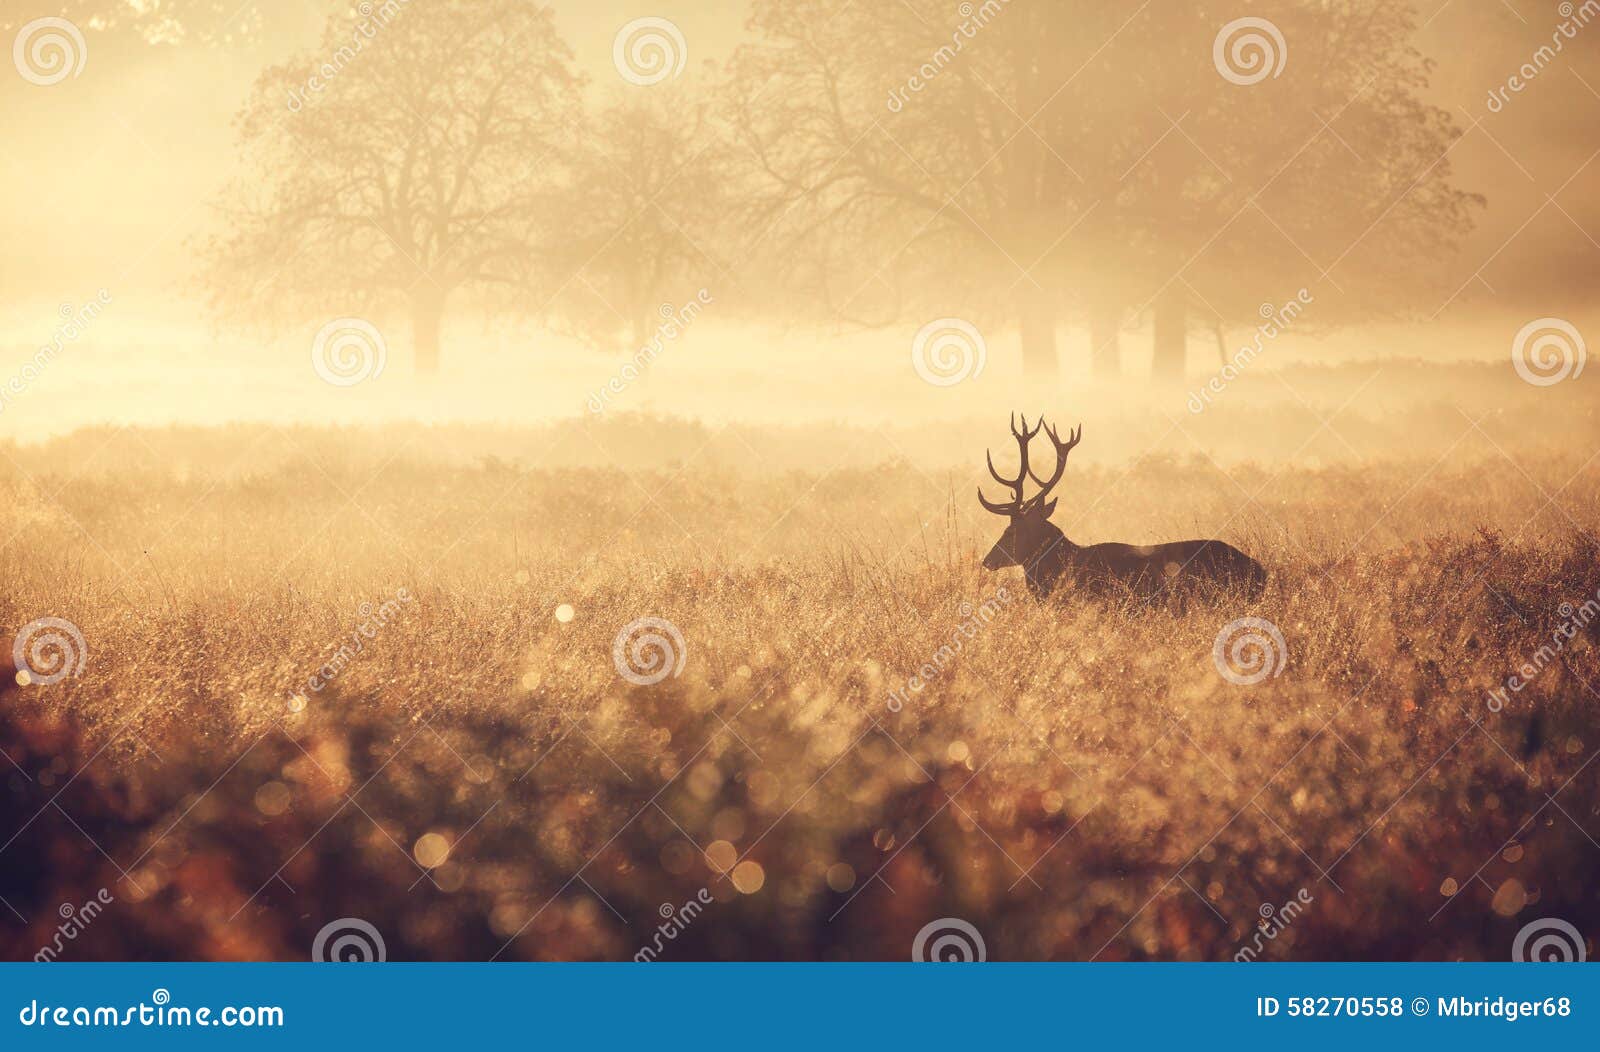 silhouette of a red deer stag